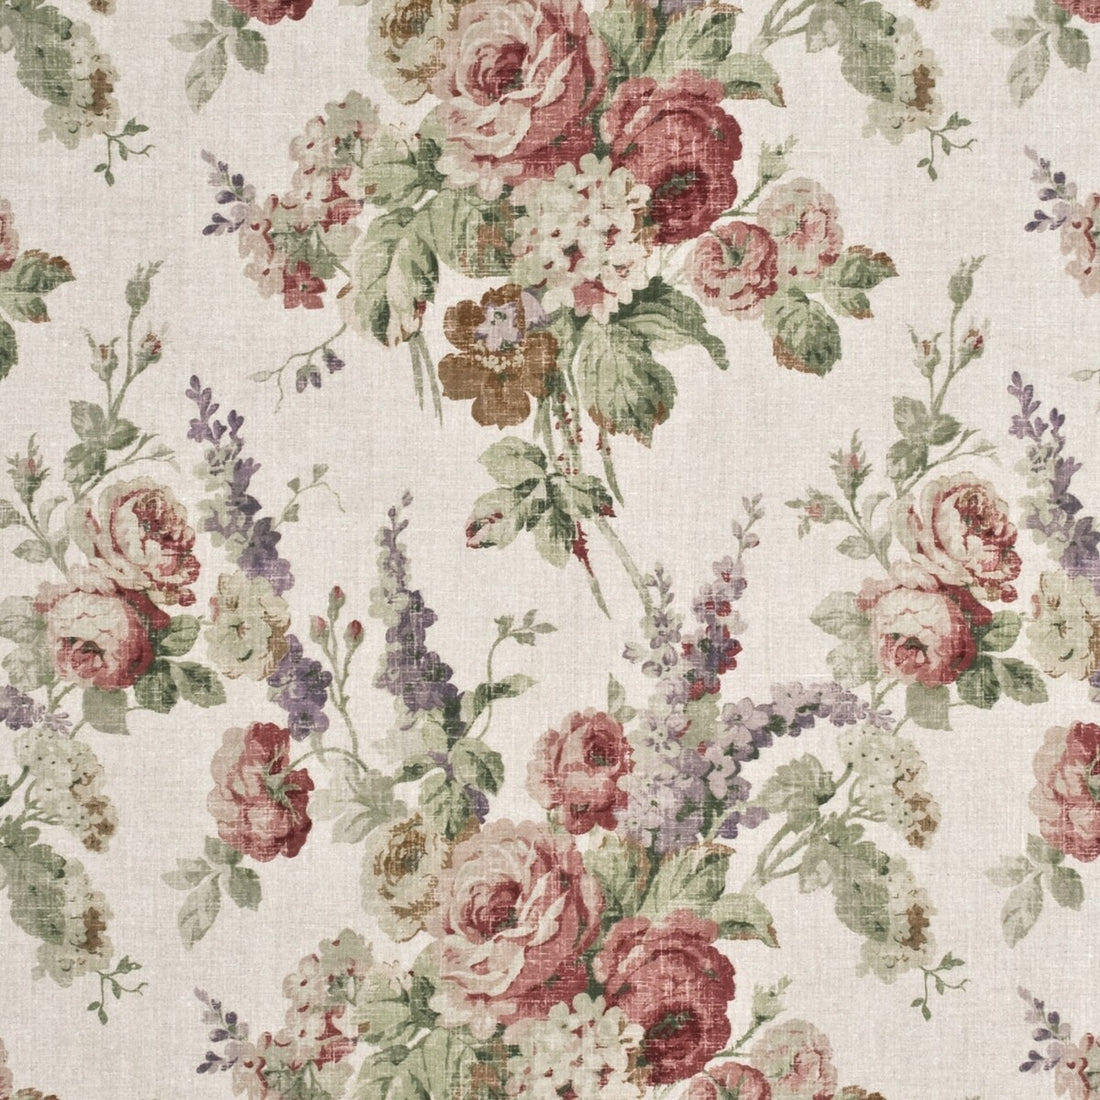 Vintage Floral fabric in rose/green color - pattern FD264.W46.0 - by Mulberry in the Country Weekend collection